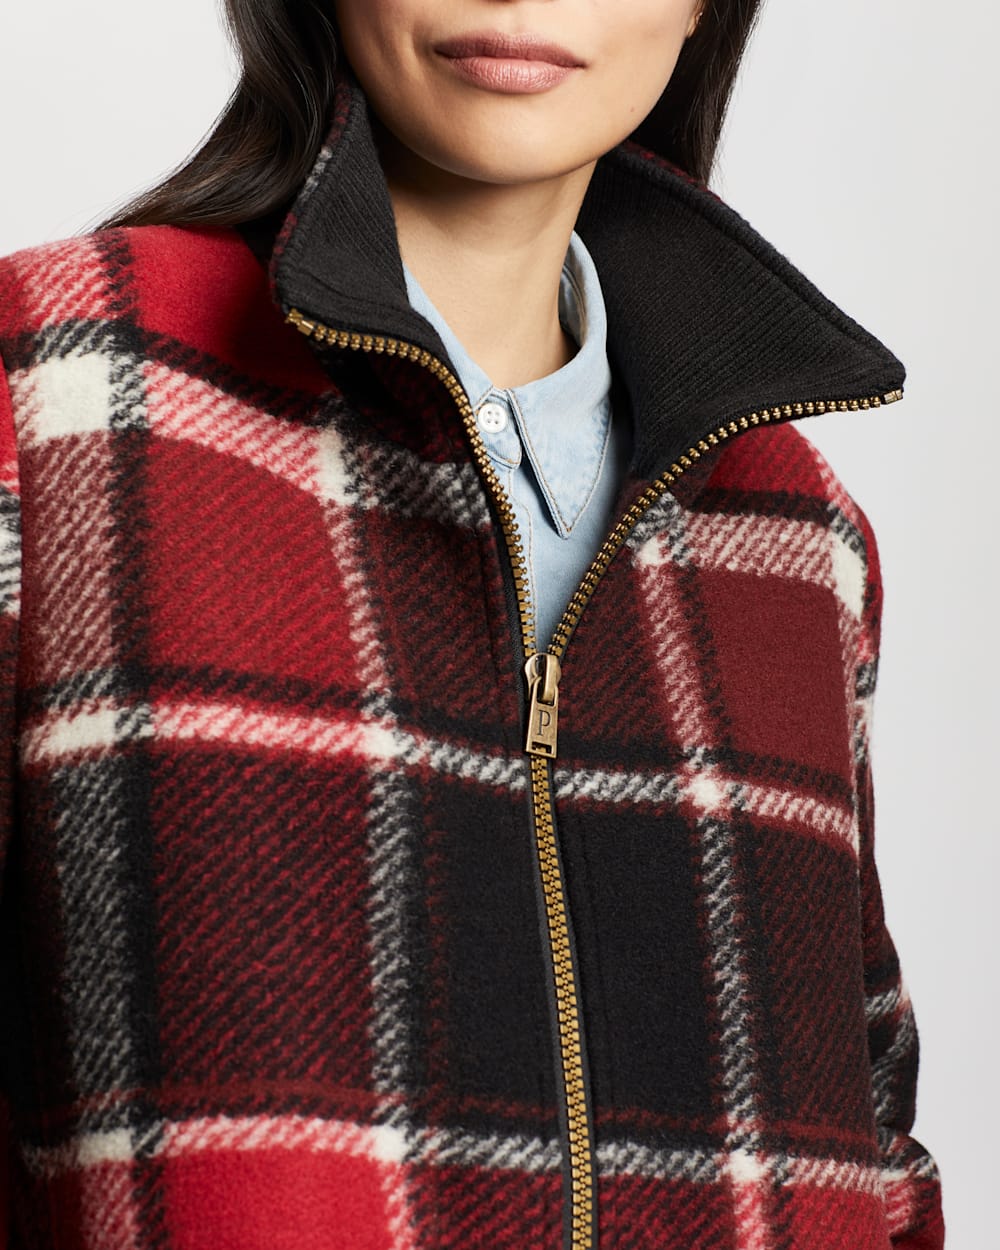 ALTERNATE VIEW OF WOMEN'S CAMDEN TOPPER COAT IN RED/BLACK EXPLODED PLAID image number 4